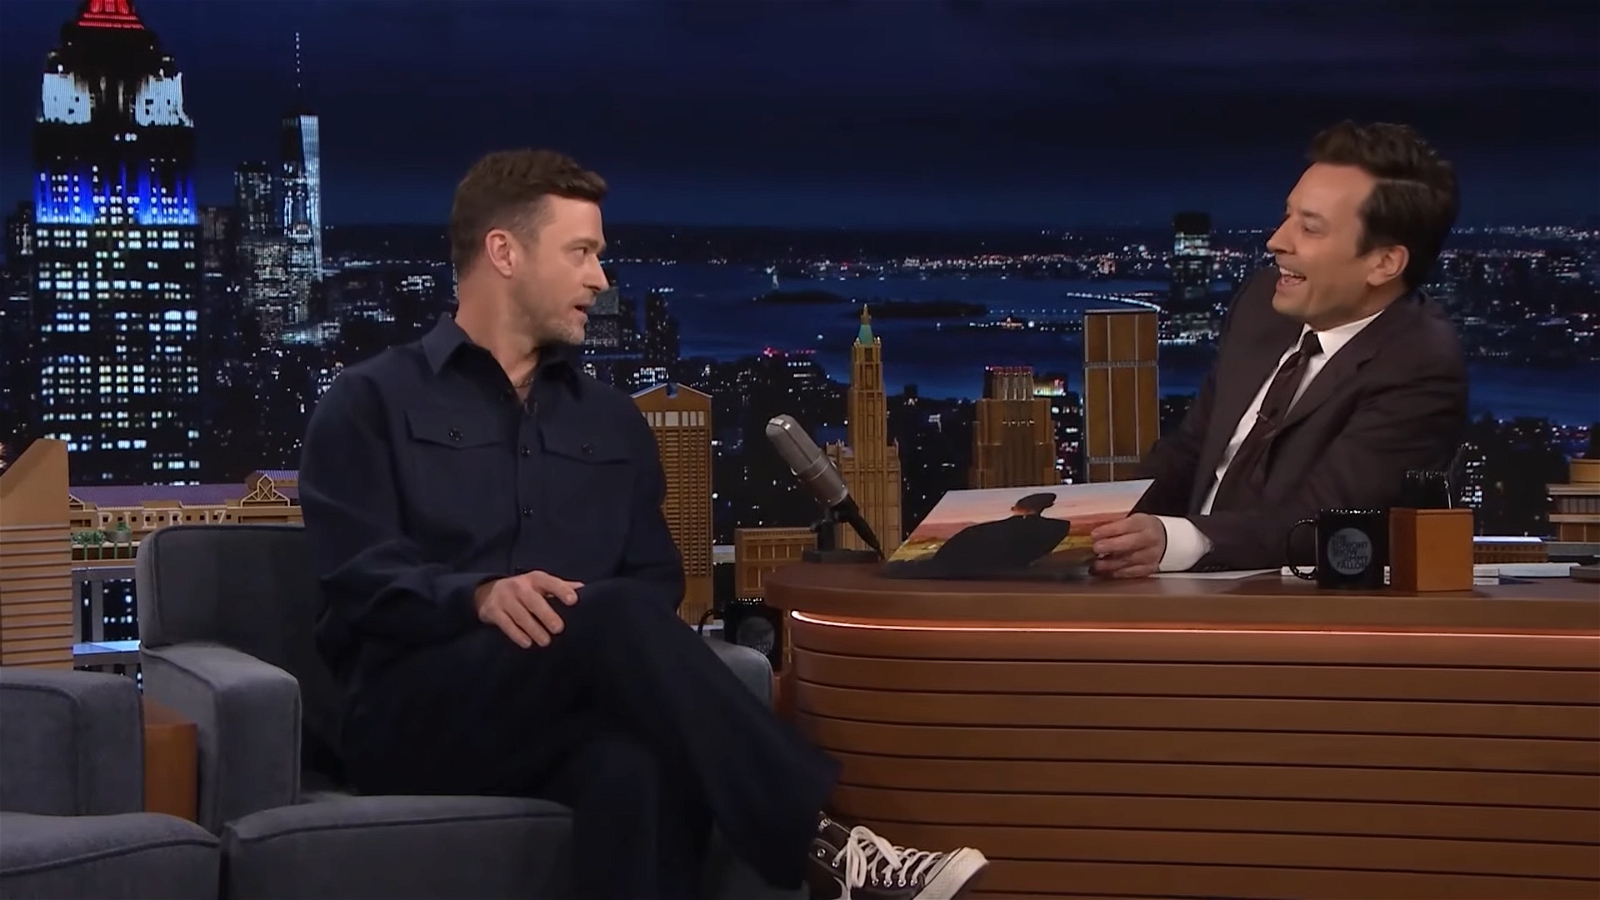 Justin Timberlake and Jimmy Kimmel sitting for an interview